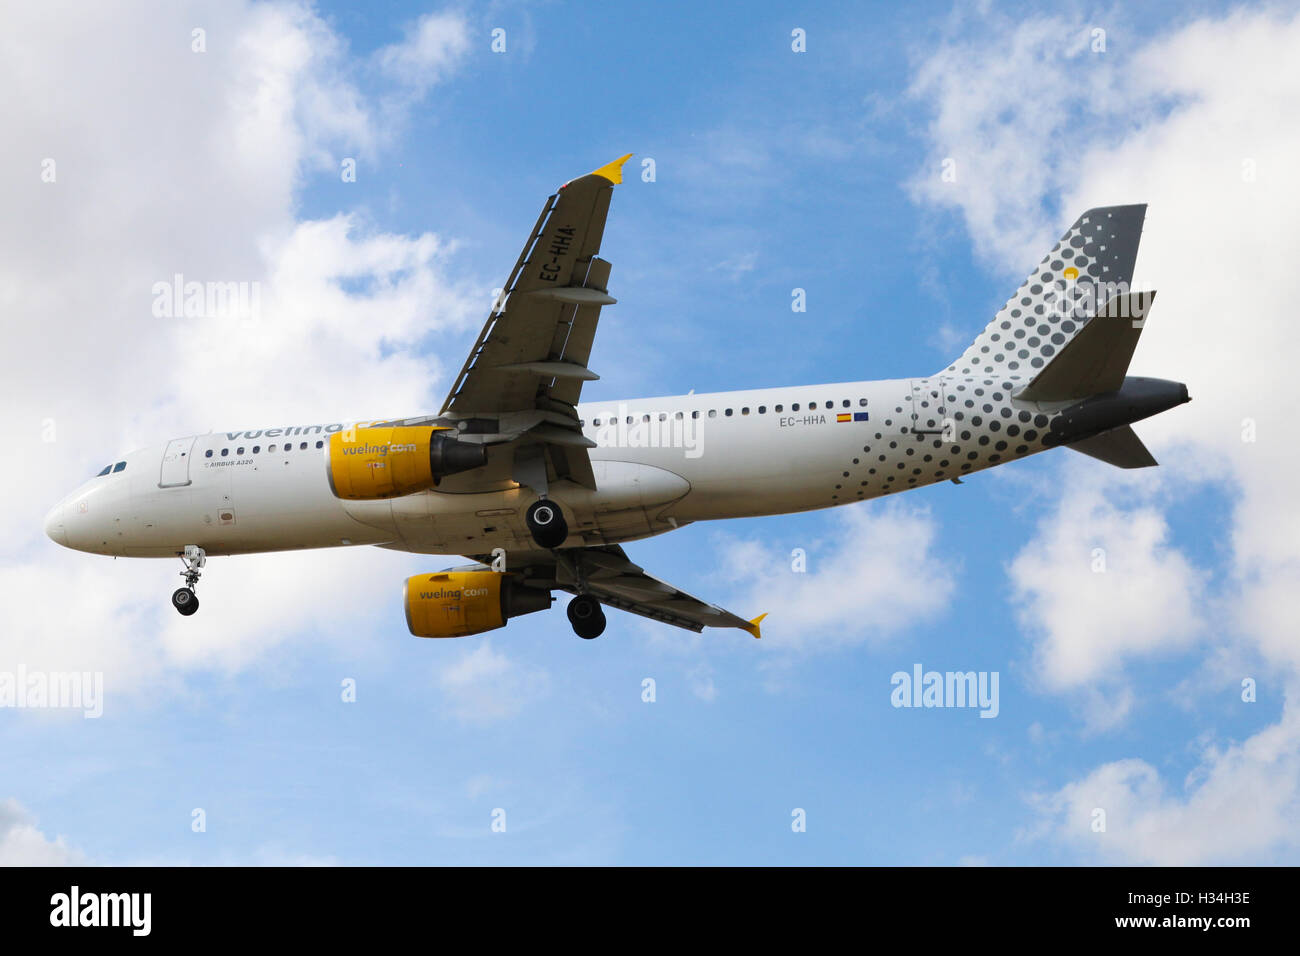 Vueling Airbus A320-214 approaching London Heathrow airport. Stock Photo